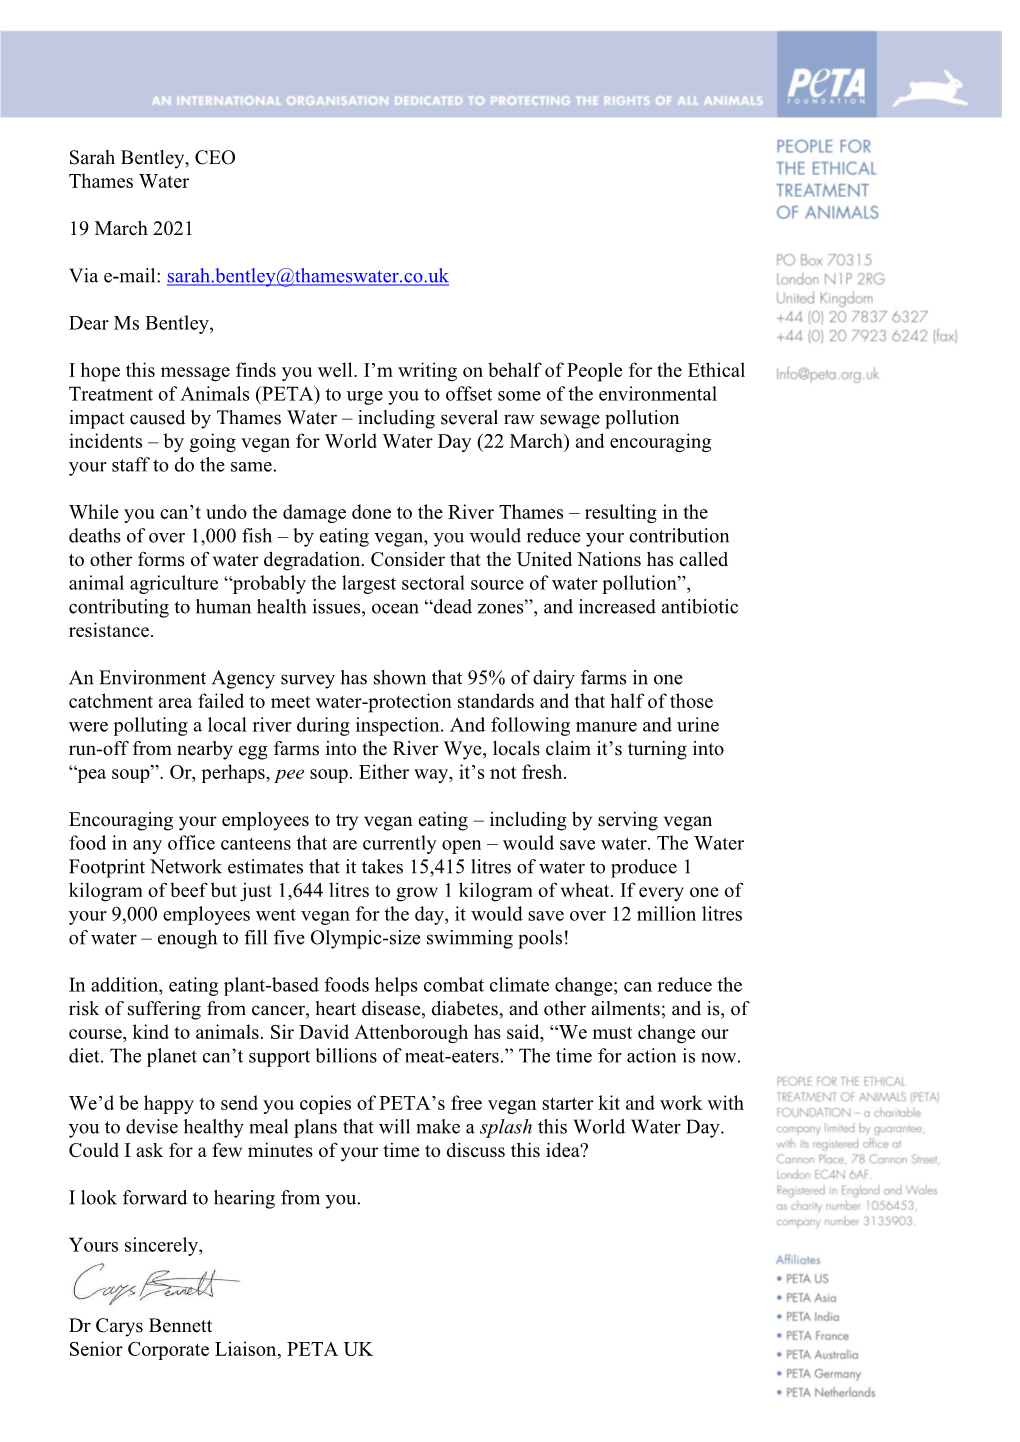 Sarah Bentley, CEO Thames Water 19 March 2021 Via E-Mail